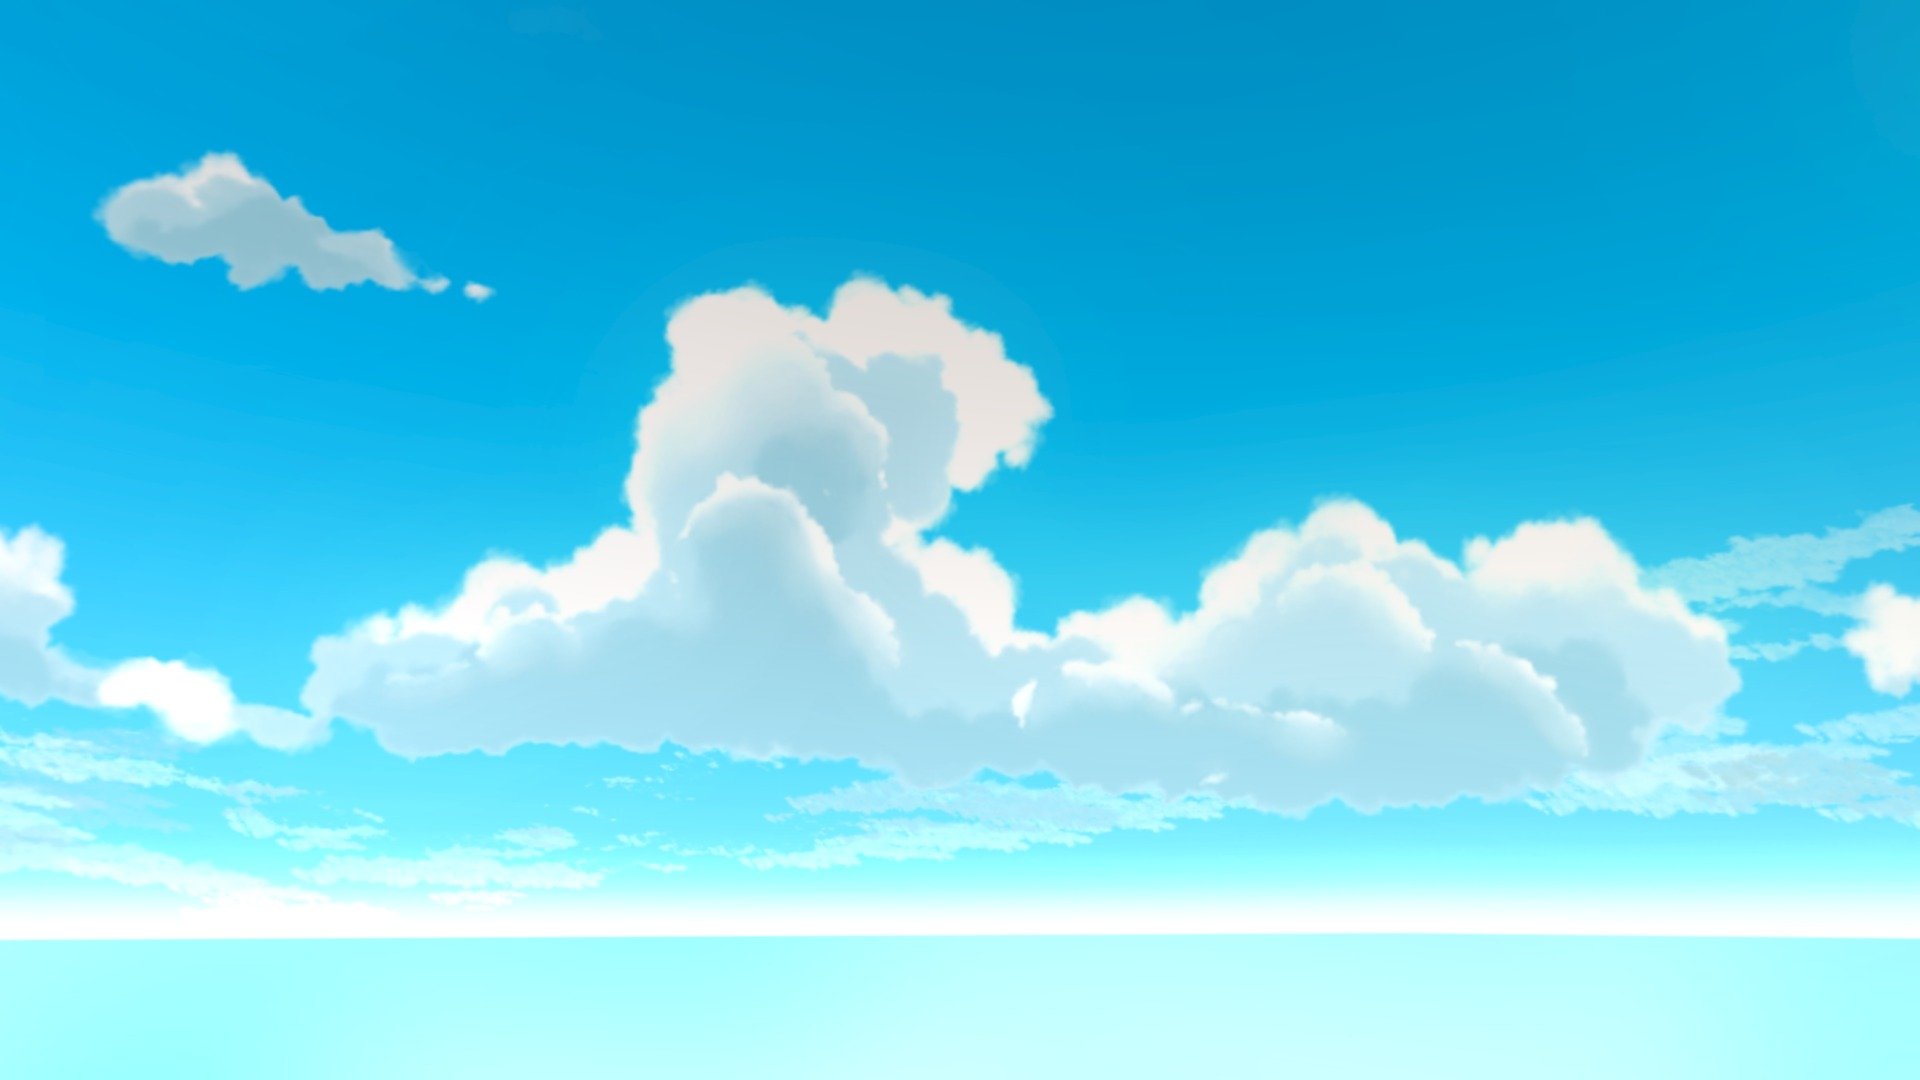 Ultimate skybox pack - Community Resources - Developer Forum | Roblox